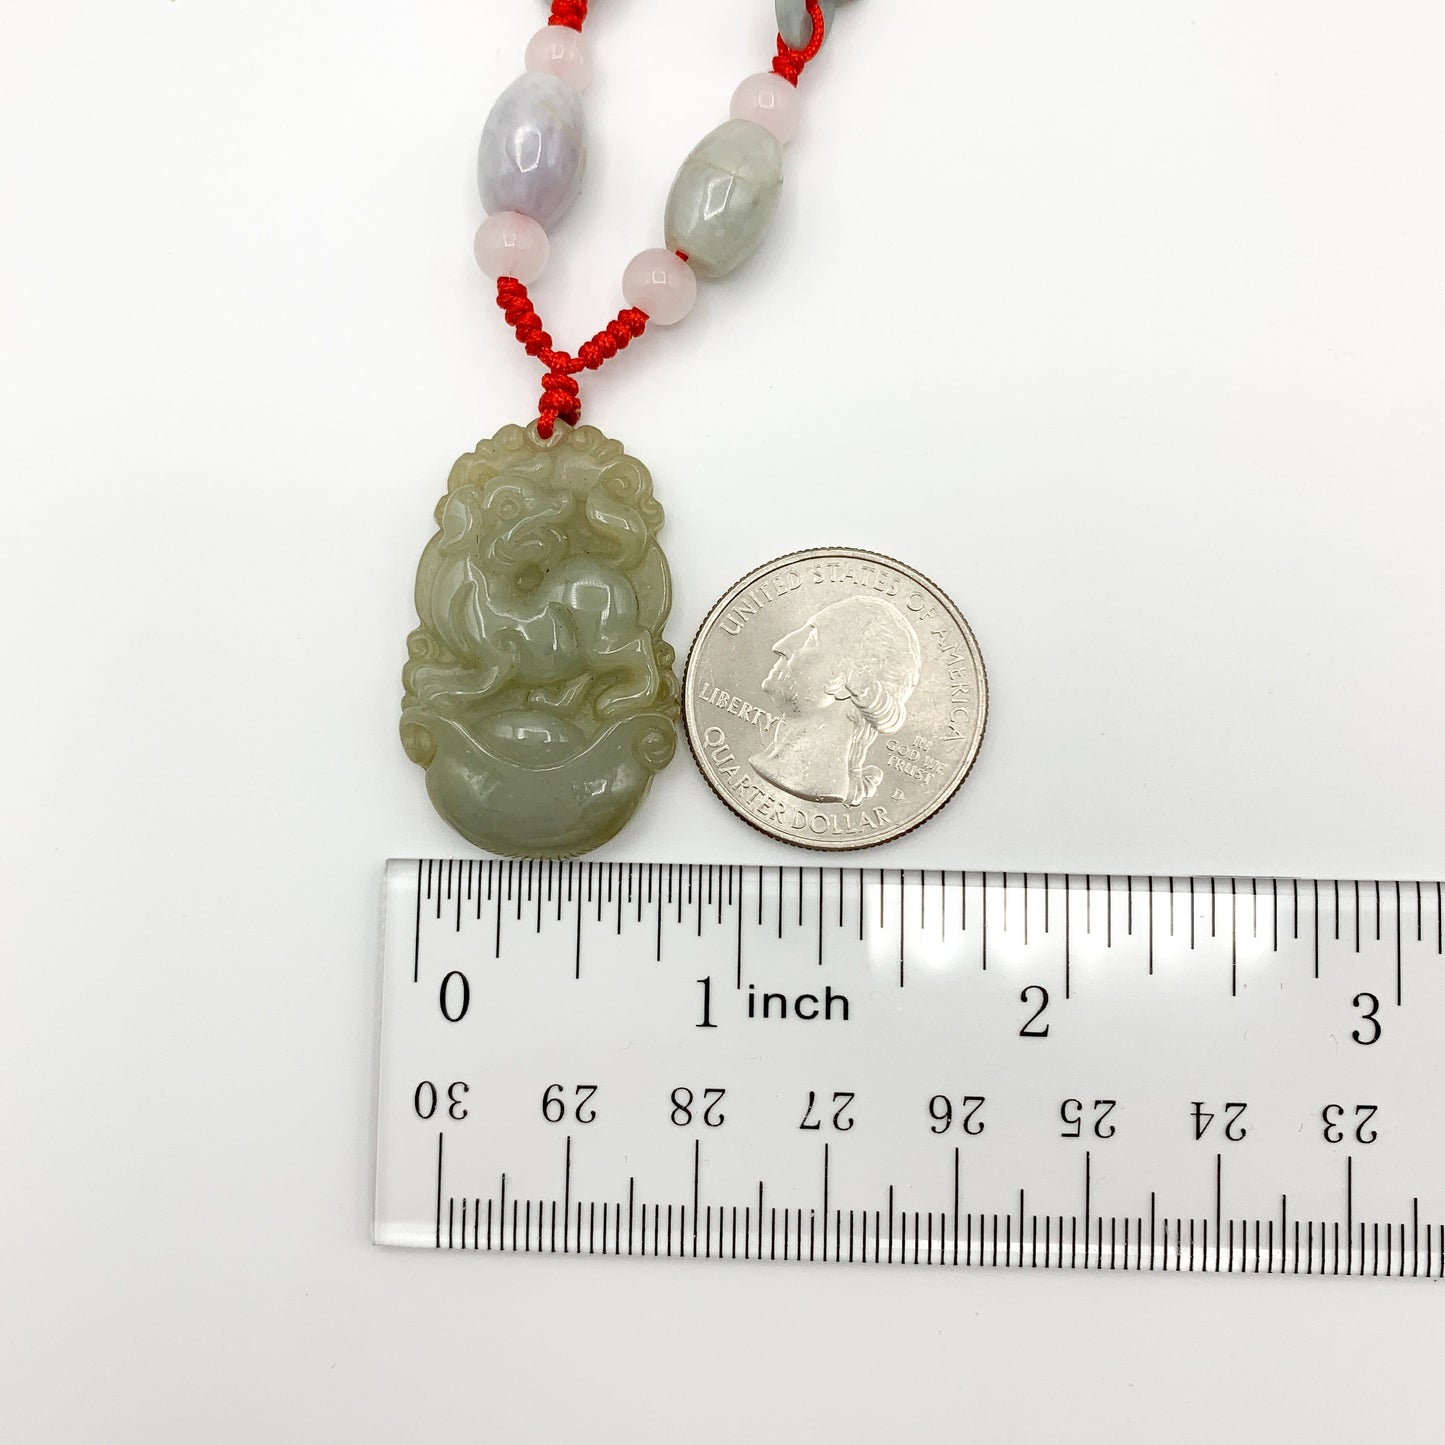 Jadeite Jade Dog Chinese Zodiac Hand Carved Red Pendant Necklace, YW-0110-1647127312 - AriaDesignCollection